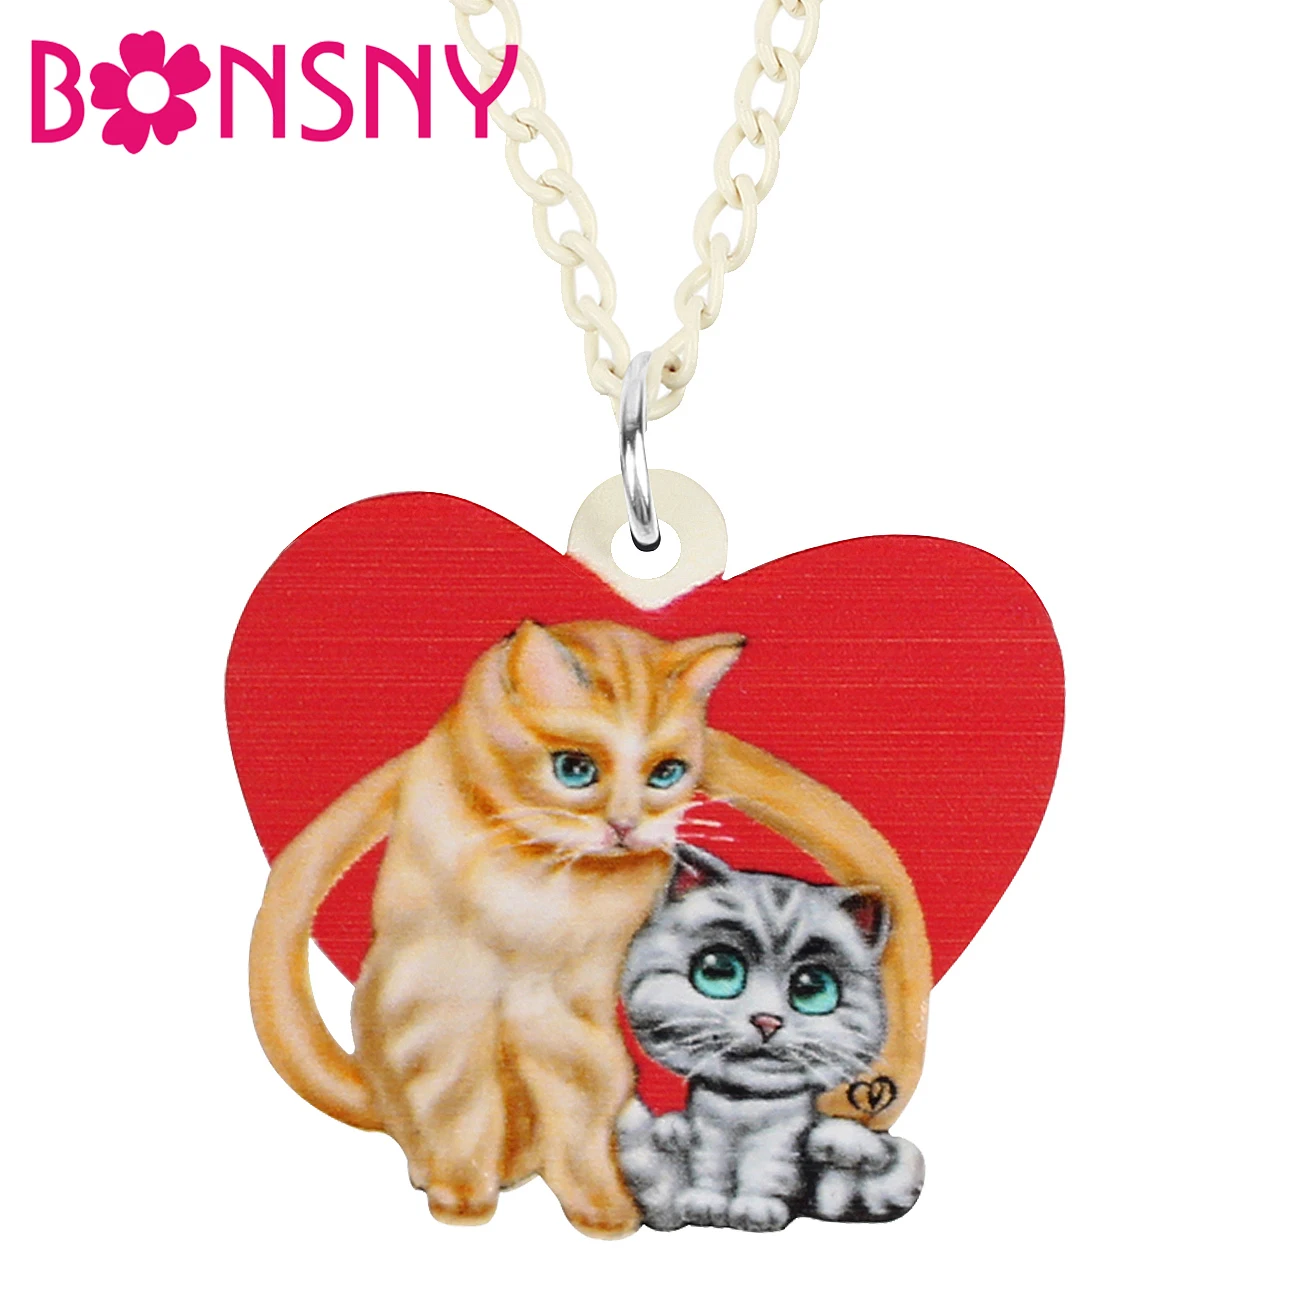 

BONSNY Mother's Day Acrylic Sweet Heart Brown Cat Kitten Necklace Pendant Long Pets Chain Jewelry Gift For Women Girls Teens